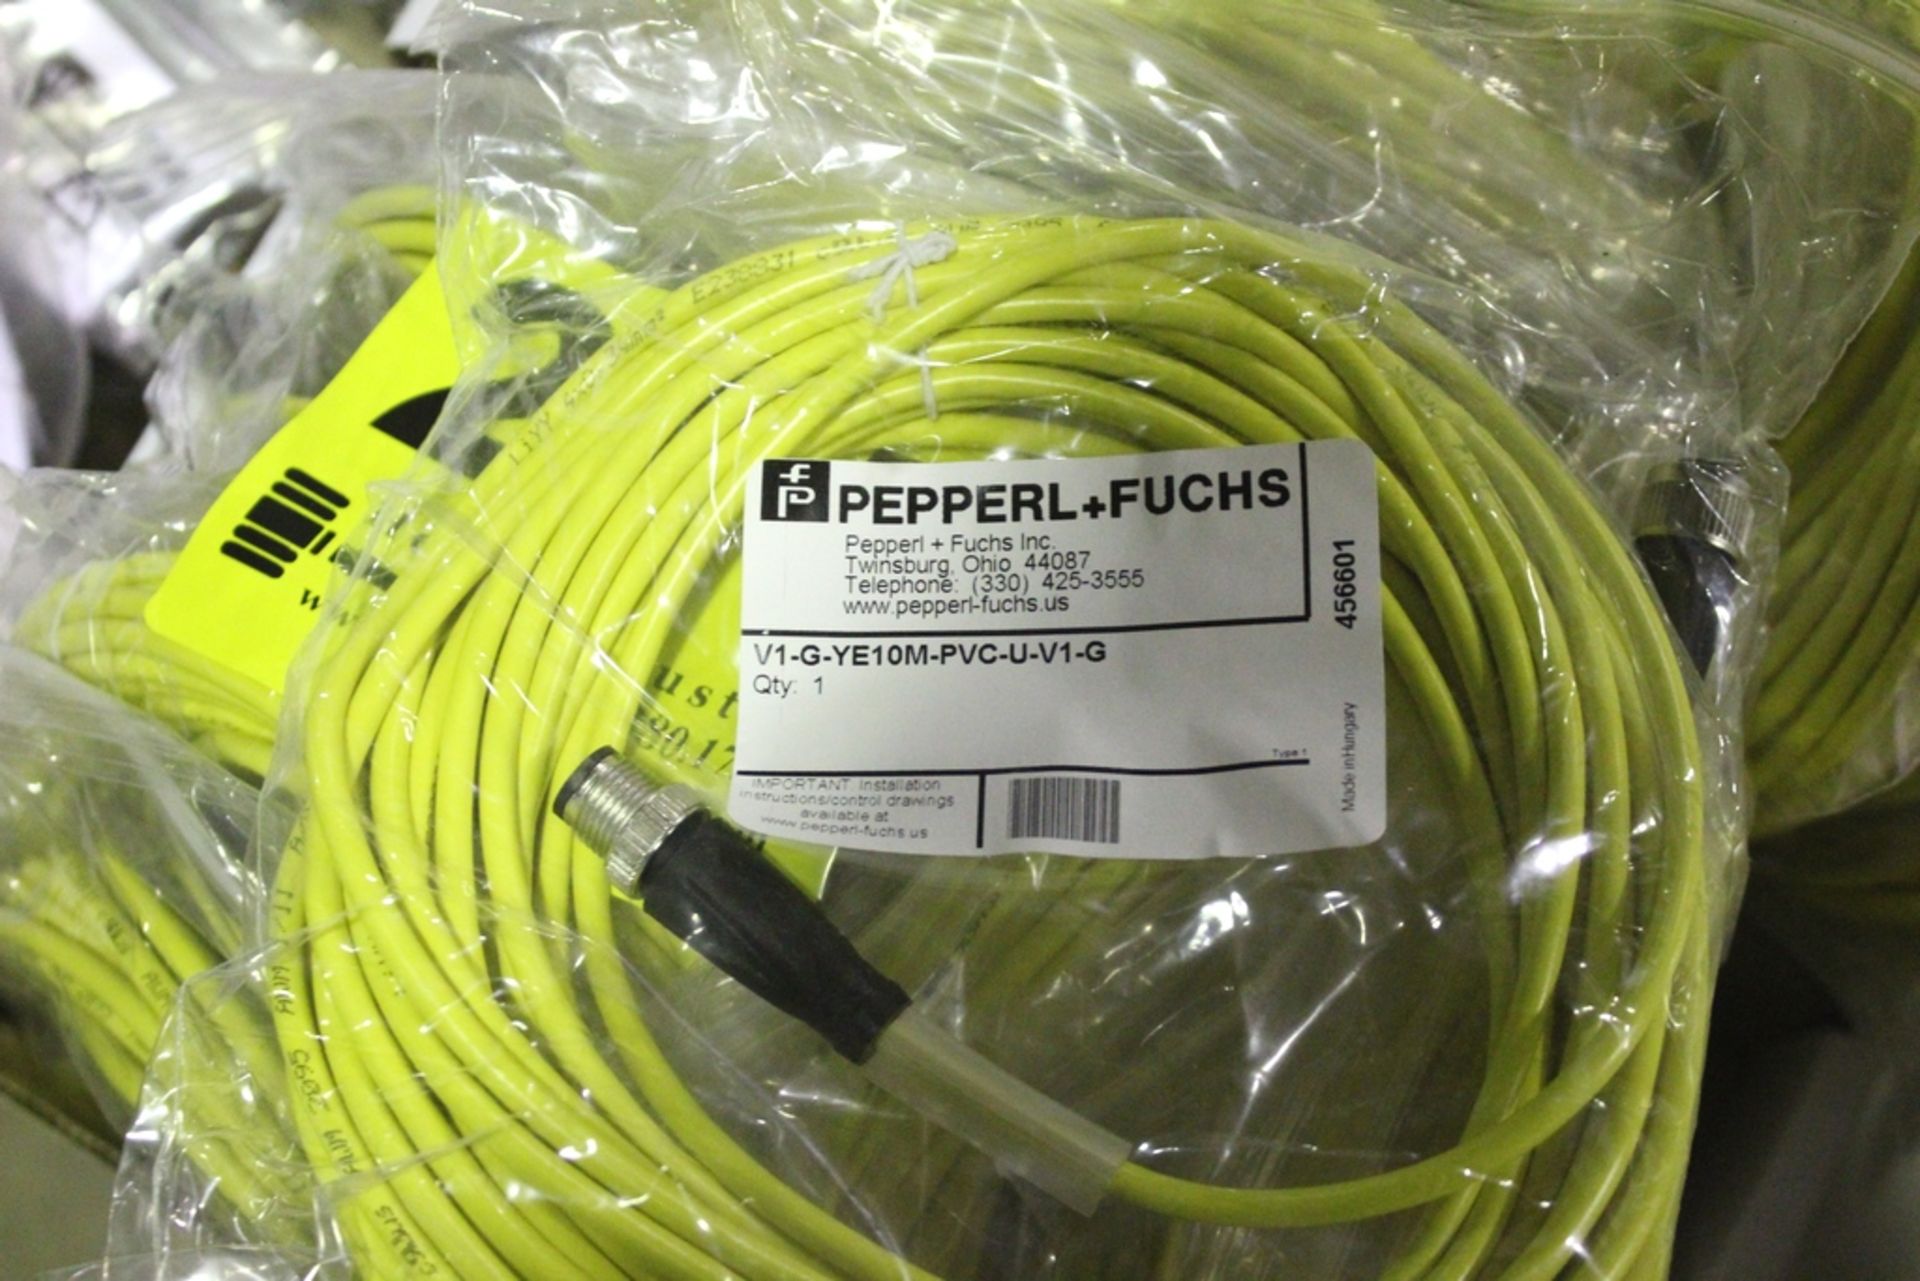 (10) PEPPERL + FUCHS V1-G-YE10M-PVC-U-V1-G M12 TO M12 CONNECTION CABLES - Image 2 of 2